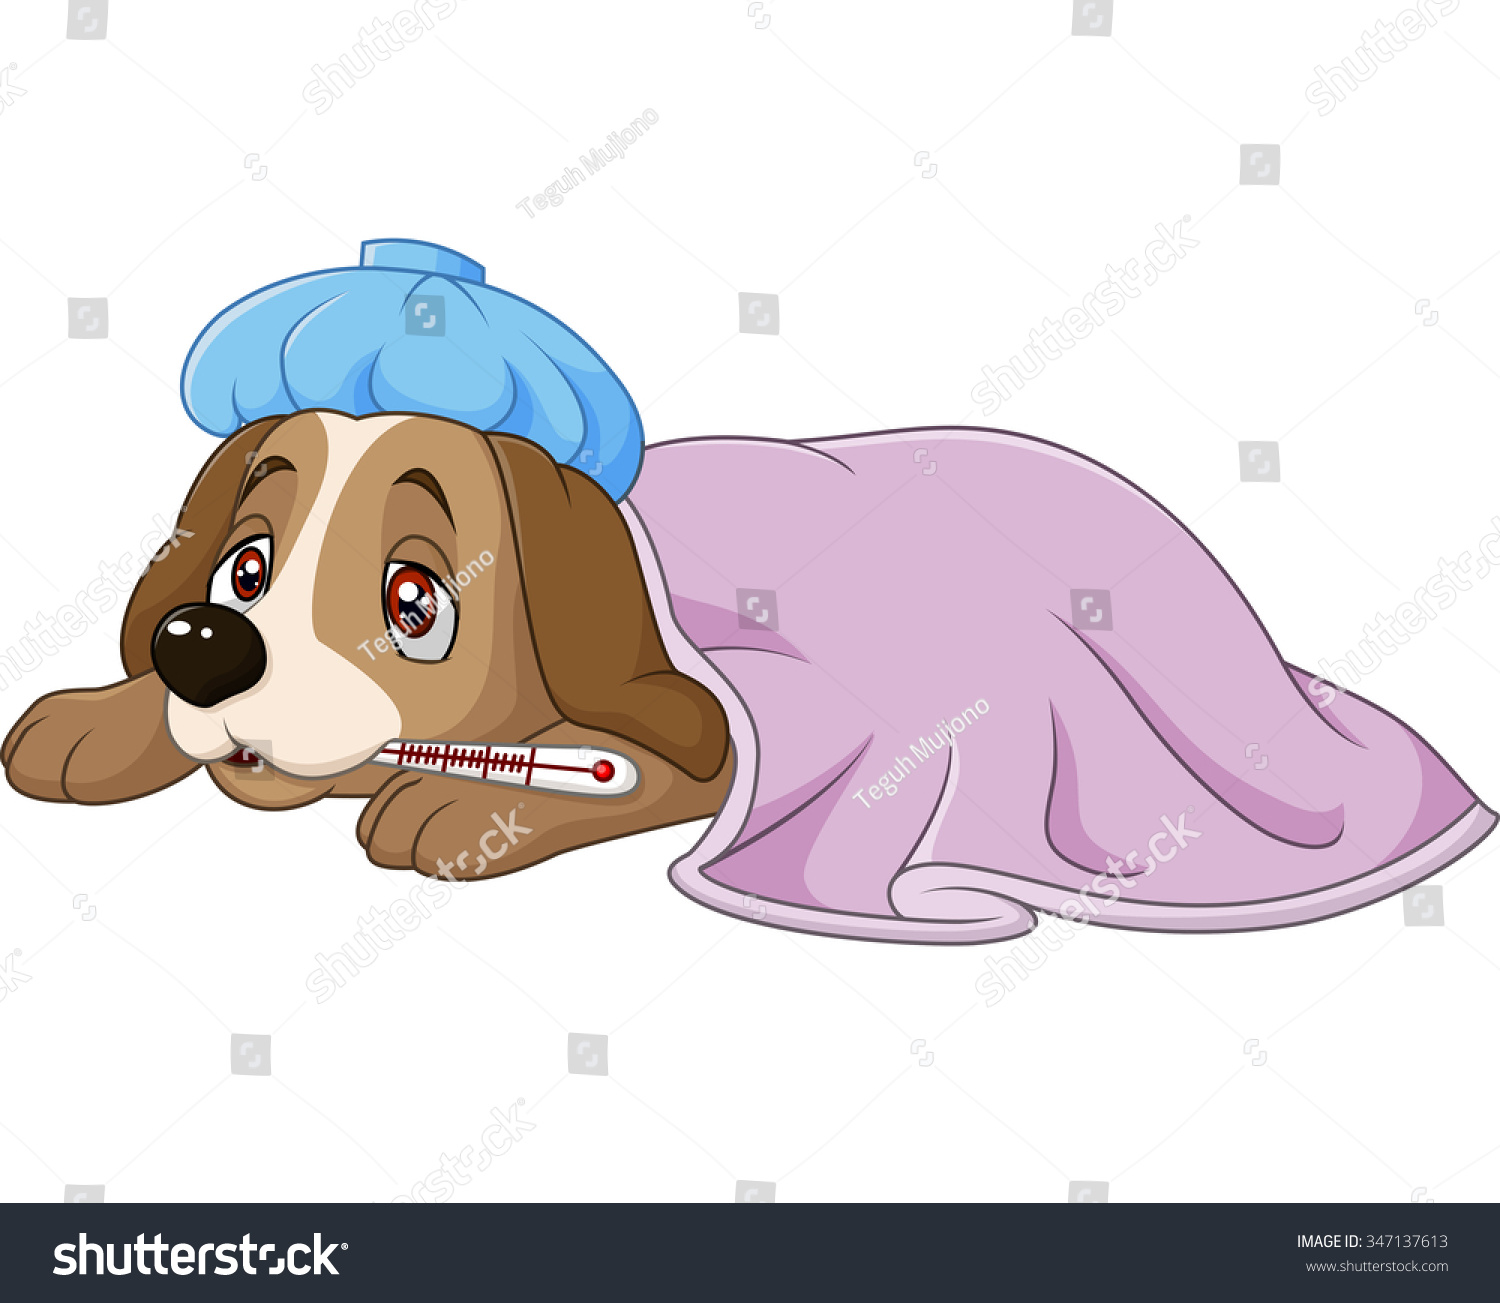 Cartoon Sick Dog Ice Bag Thermometer Stock Vector (Royalty Free ...